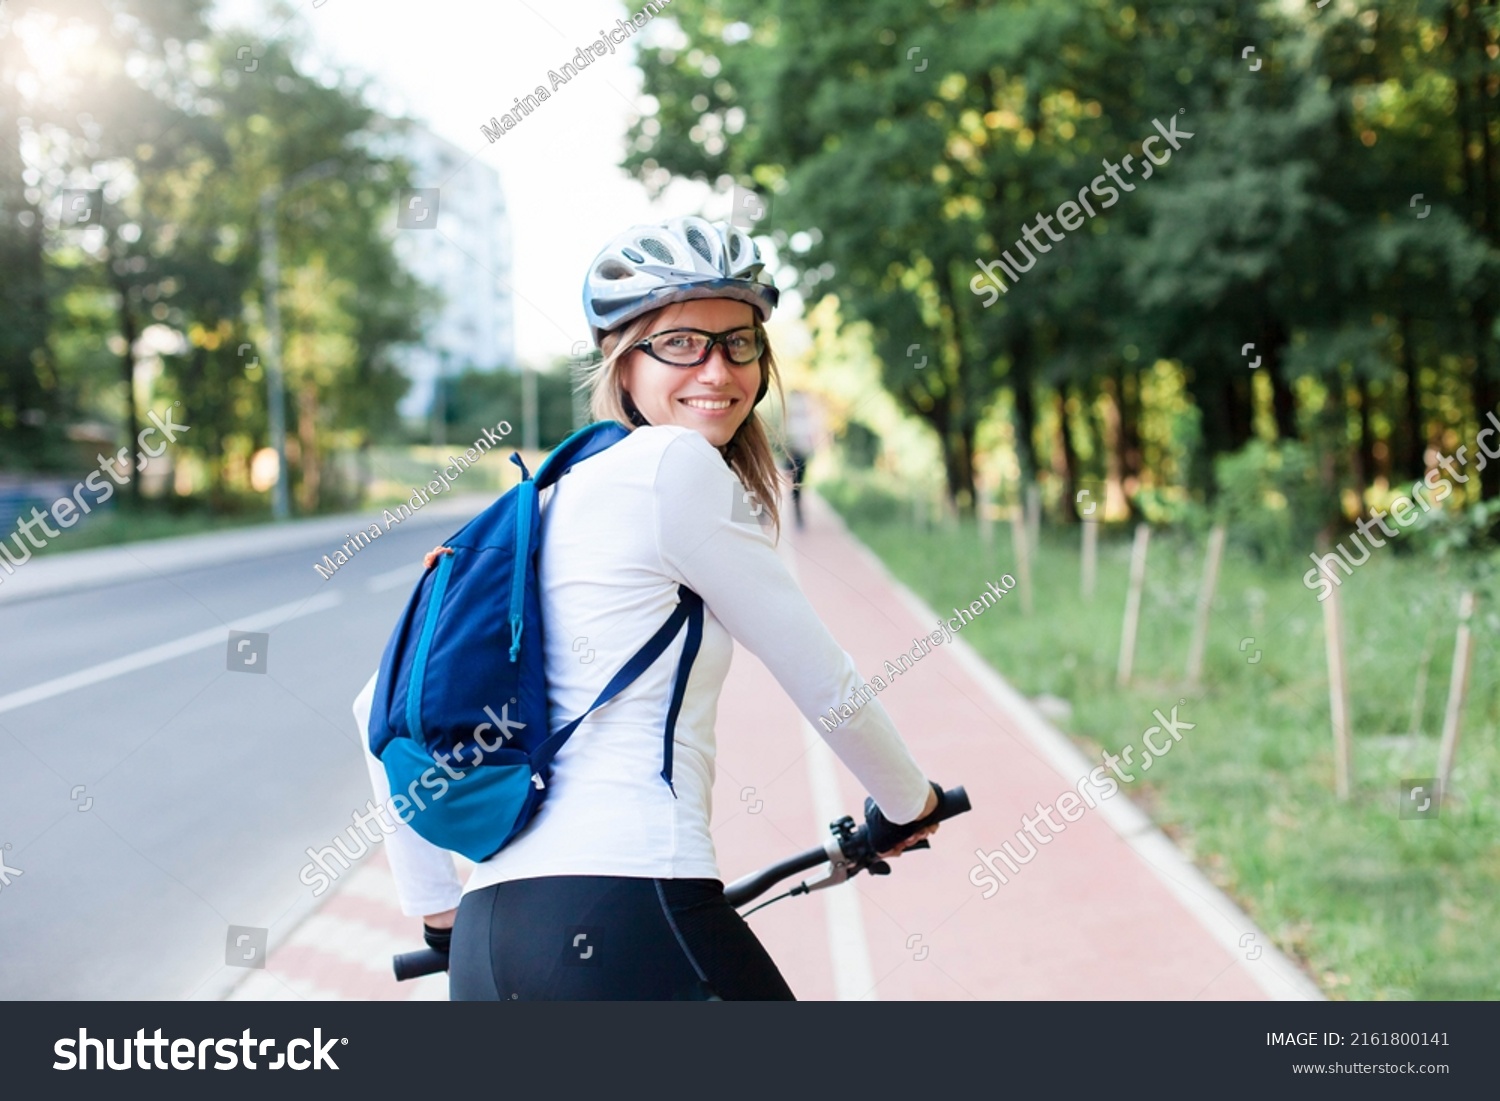 Happy woman riding bike on city street. Road with bicycle path. Cyclists #2161800141